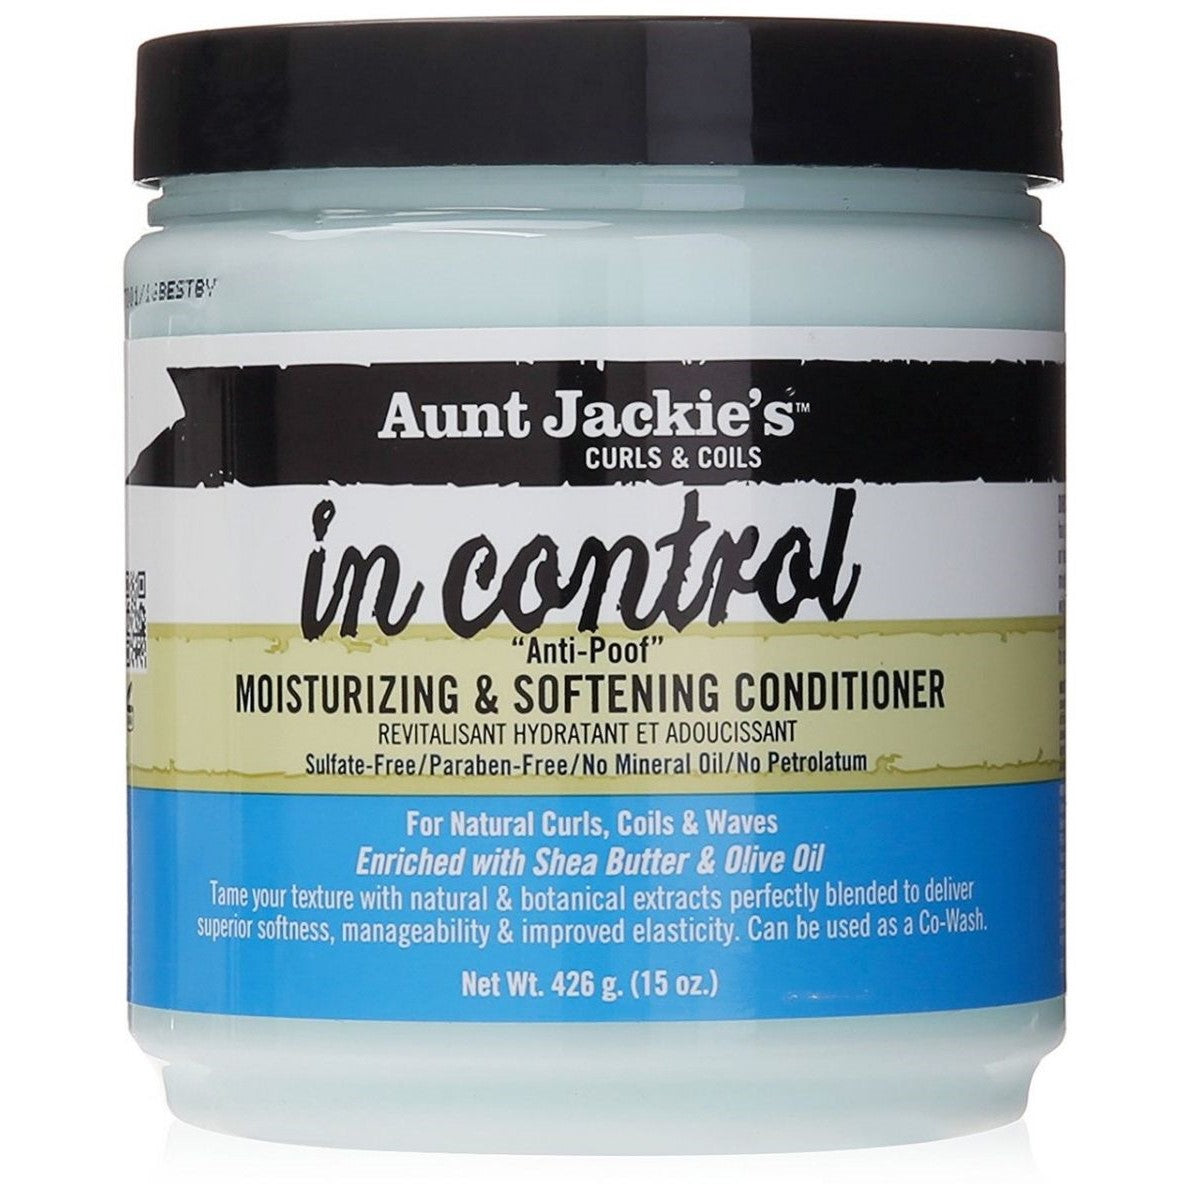 AUNT JACKIE'S CURLS & COILS IN CONTROL ANTI-POOF MOISTURIZING & SOFTING CONDITIONER 426GR